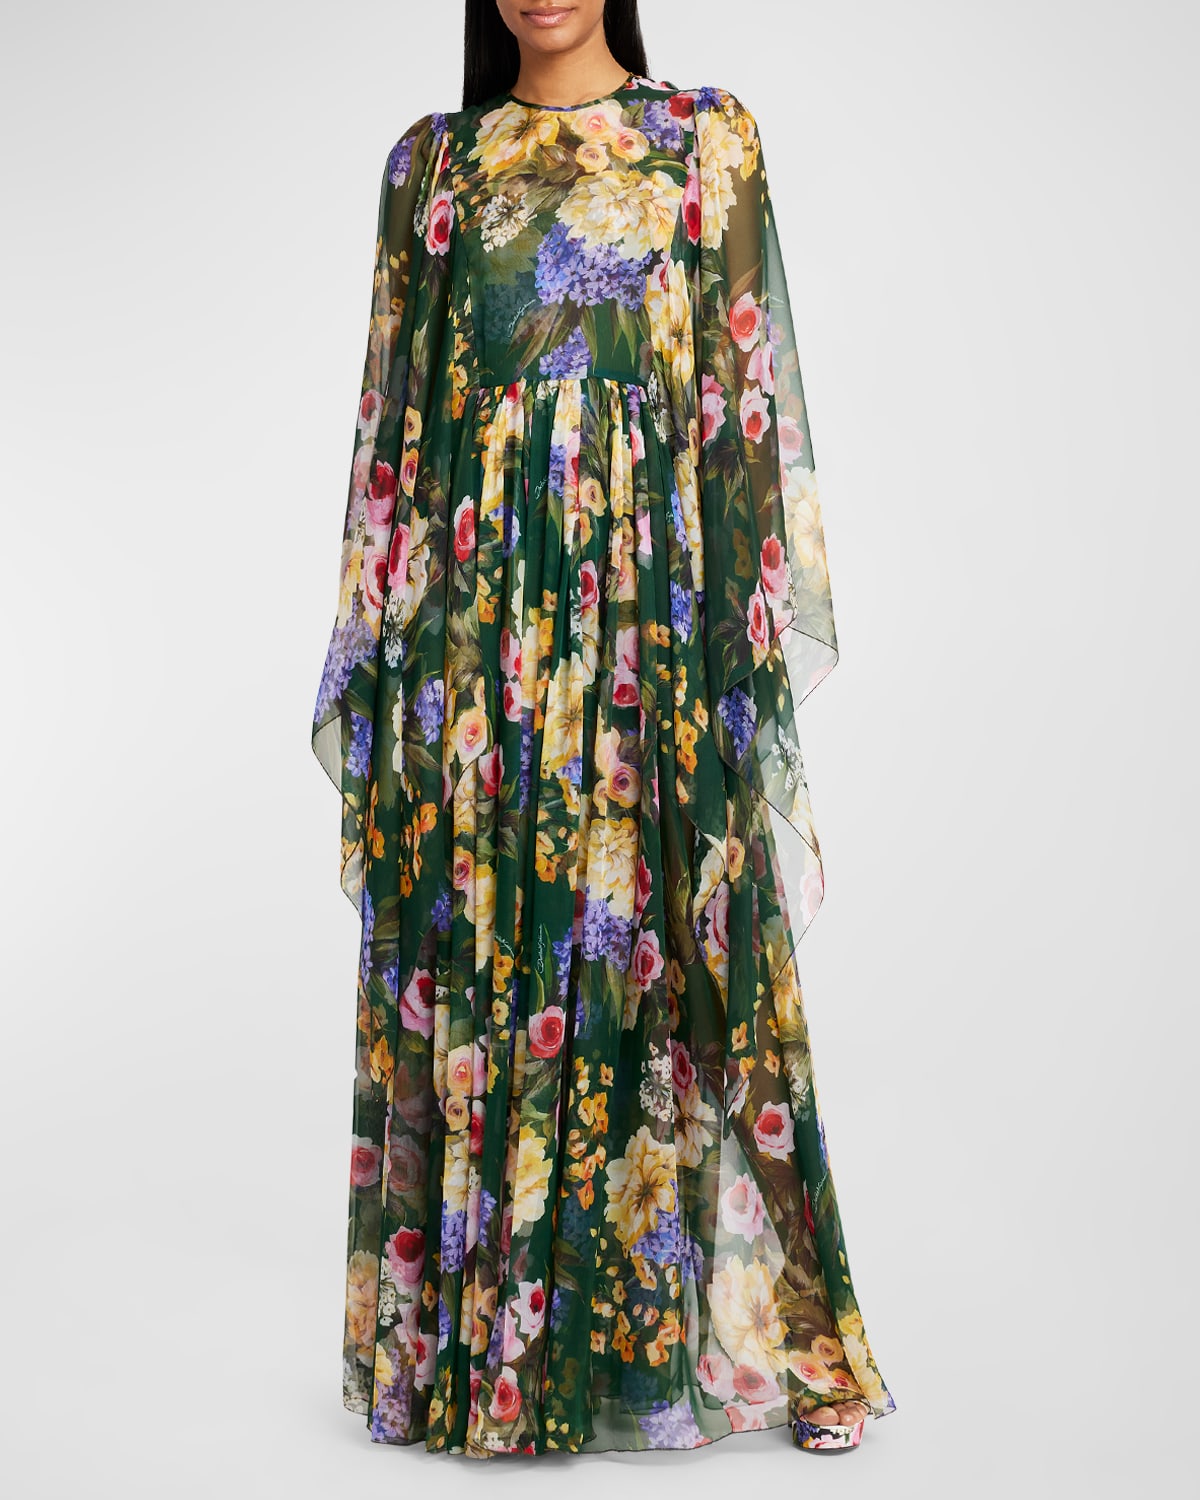 DOLCE & GABBANA FLORAL PRINT CHIFFON GOWN WITH CAPE SLEEVES